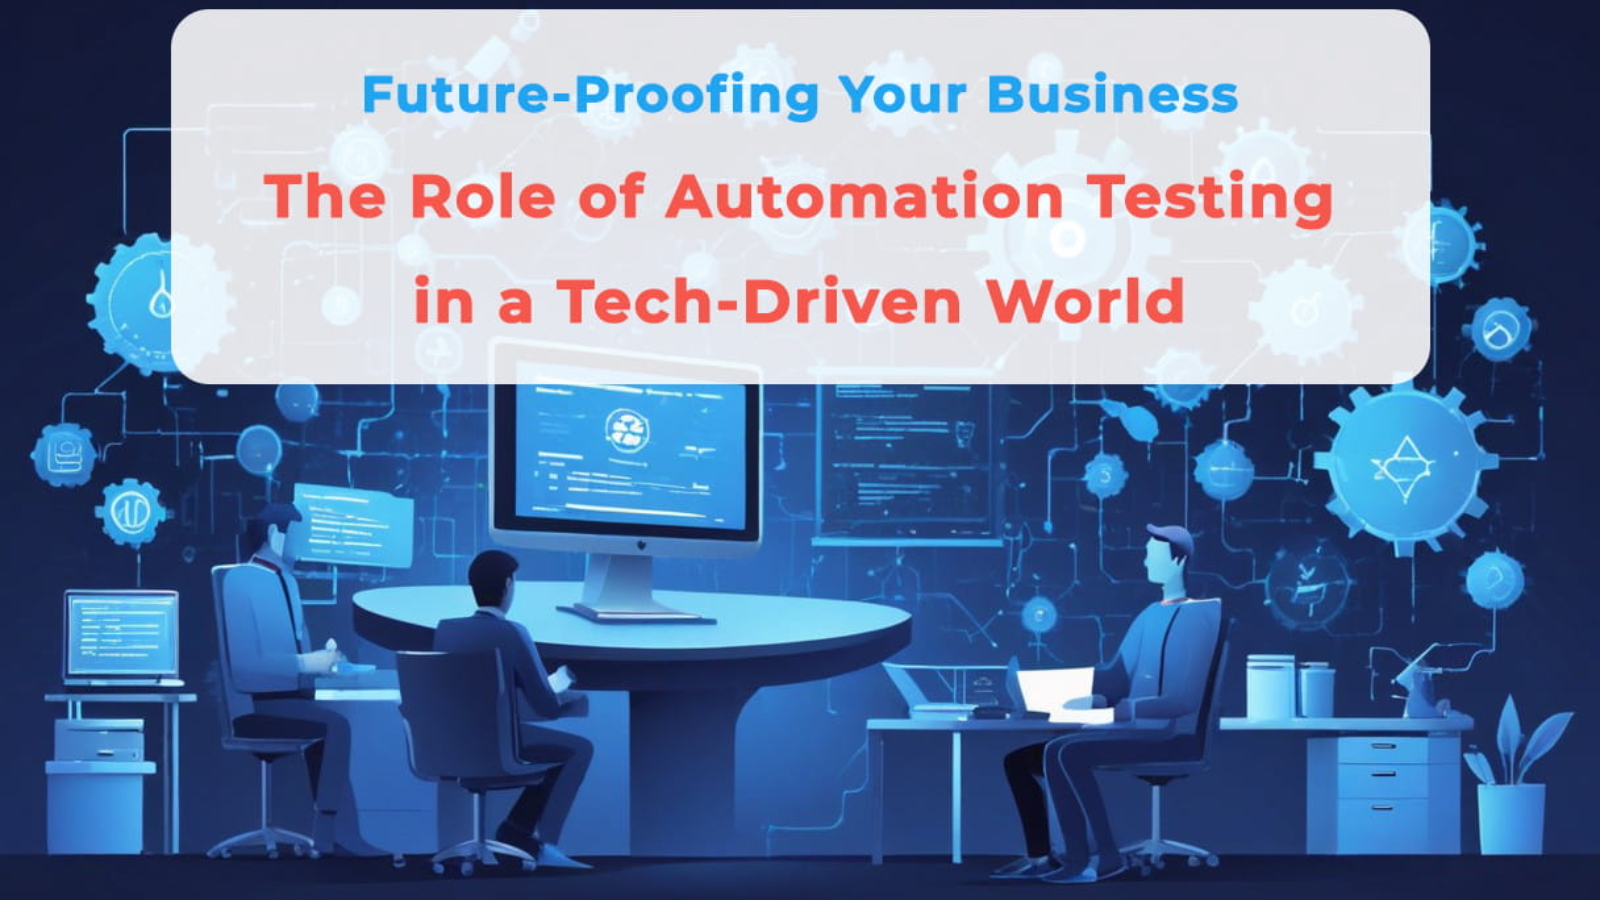 Future-Proofing Your Business The Role of Automation Testing in a Tech-Driven World